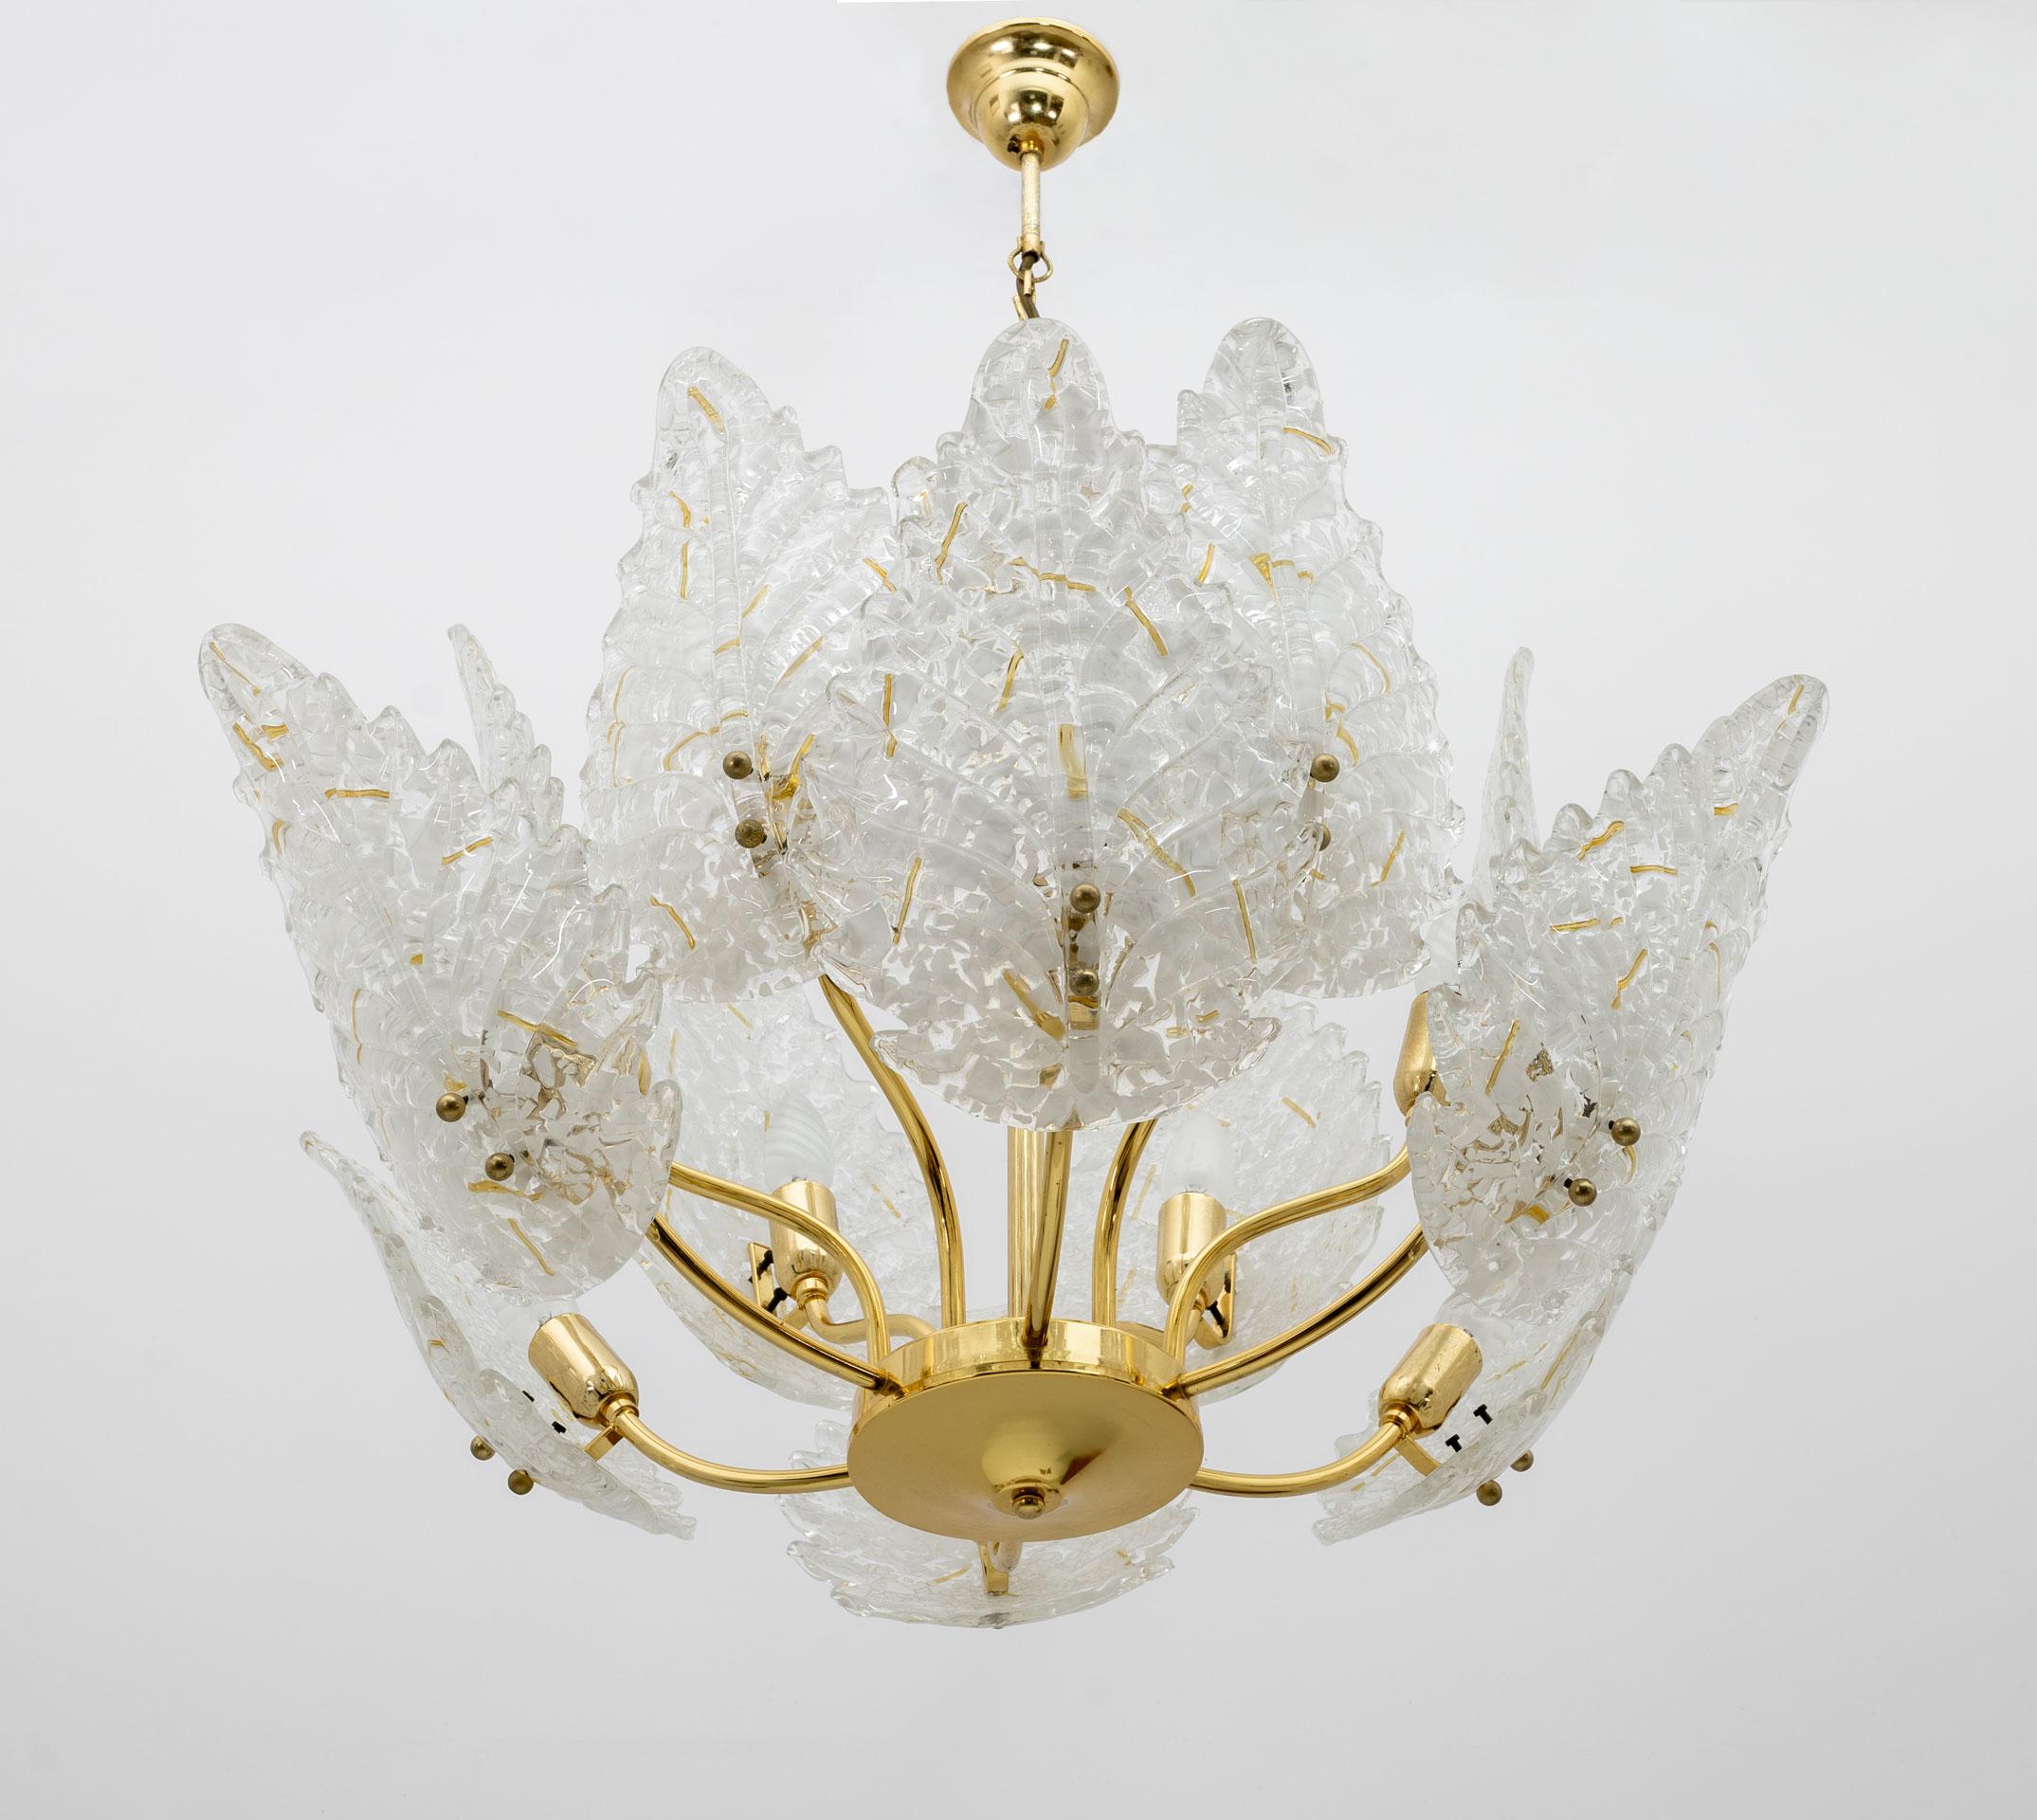 Twelve-leaf chandelier in Murano glass, twelve lights with E14 or E12 USA socket, in pure gold-plated brass.